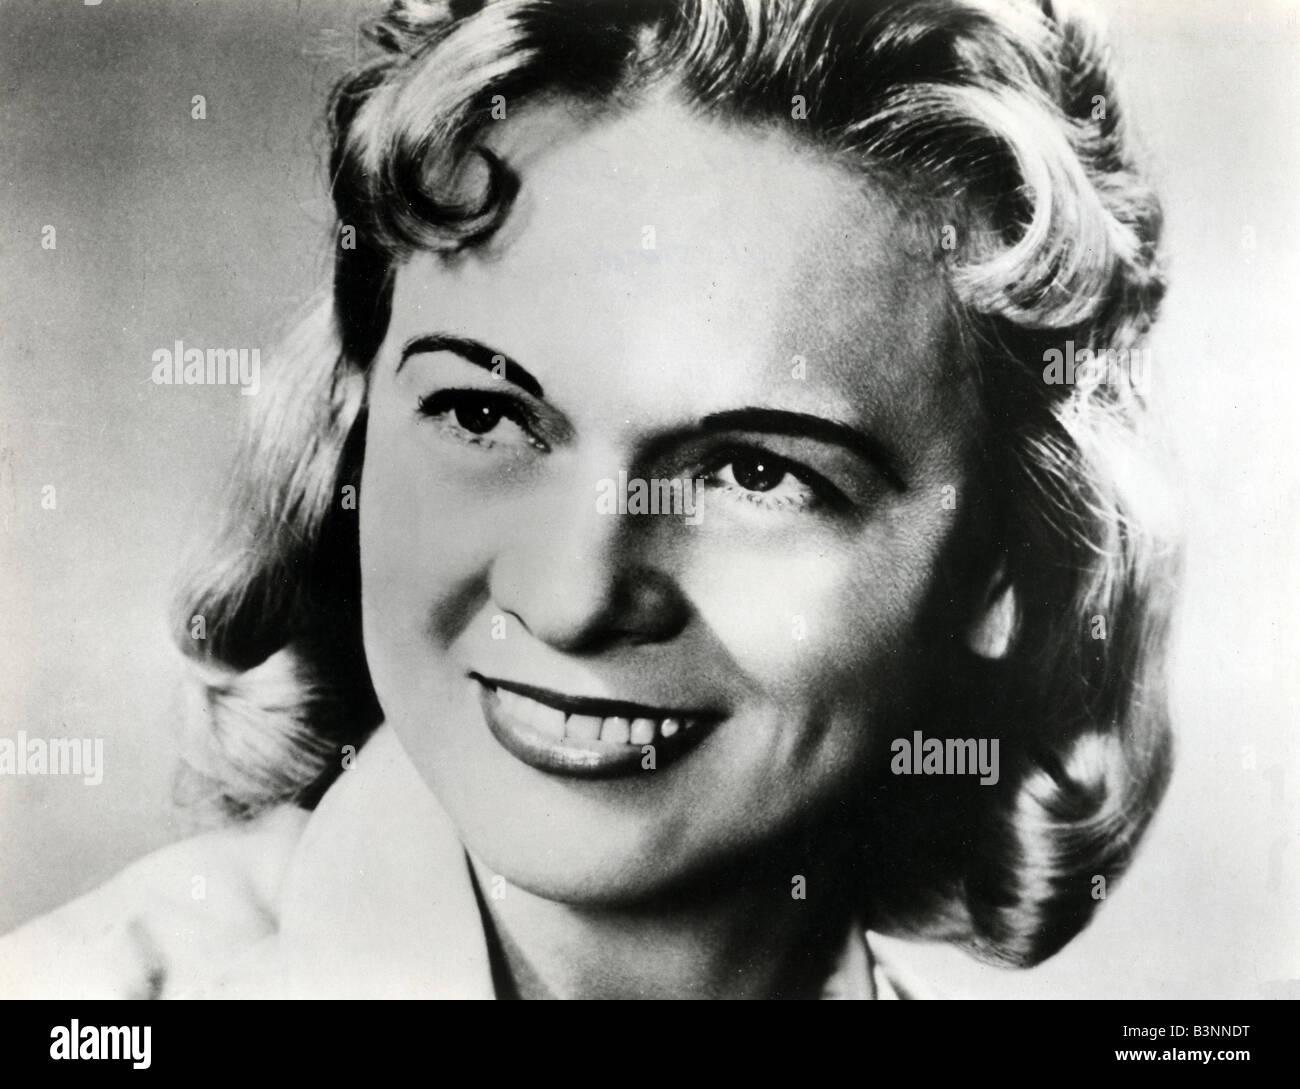 JEAN SHEPHERD US Country singer about 1963 Stock Photo - Alamy